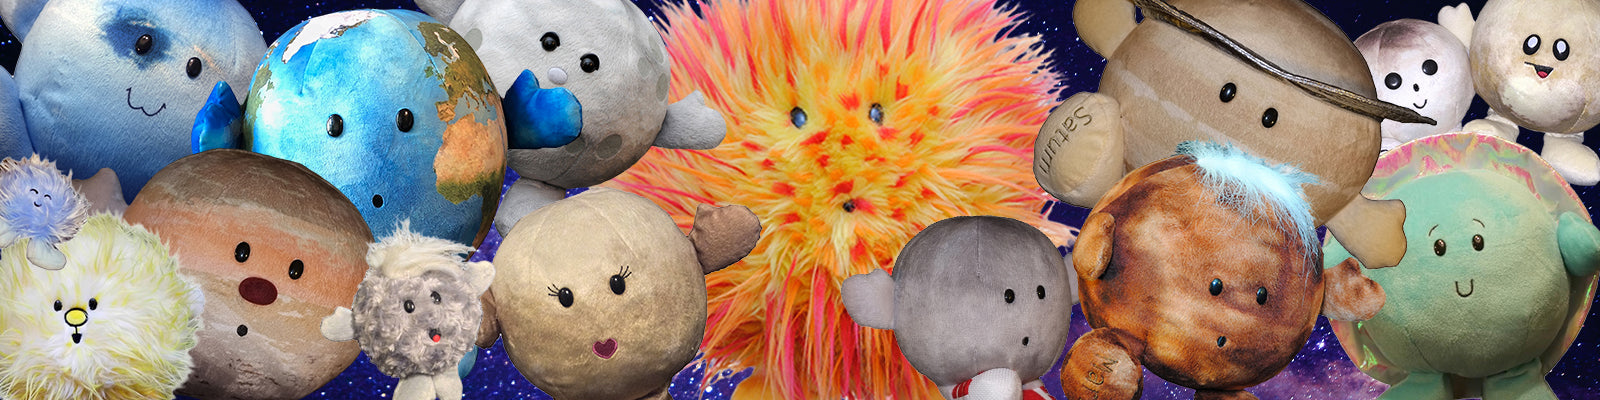 Celestial Buddies Space and Planet Soft Toys